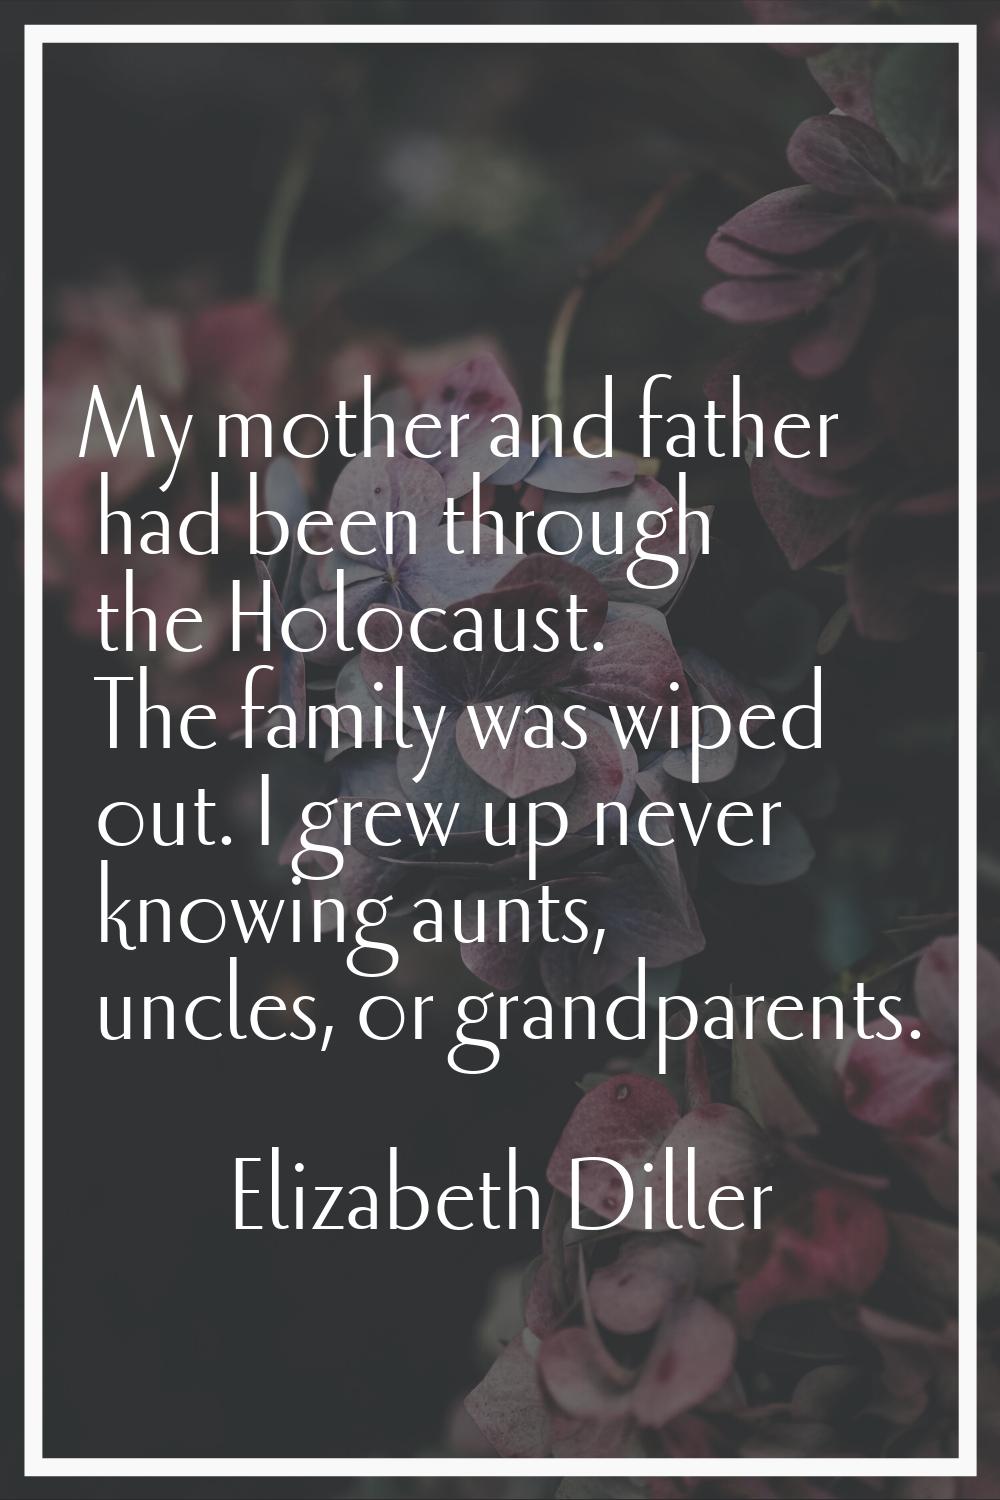 My mother and father had been through the Holocaust. The family was wiped out. I grew up never know